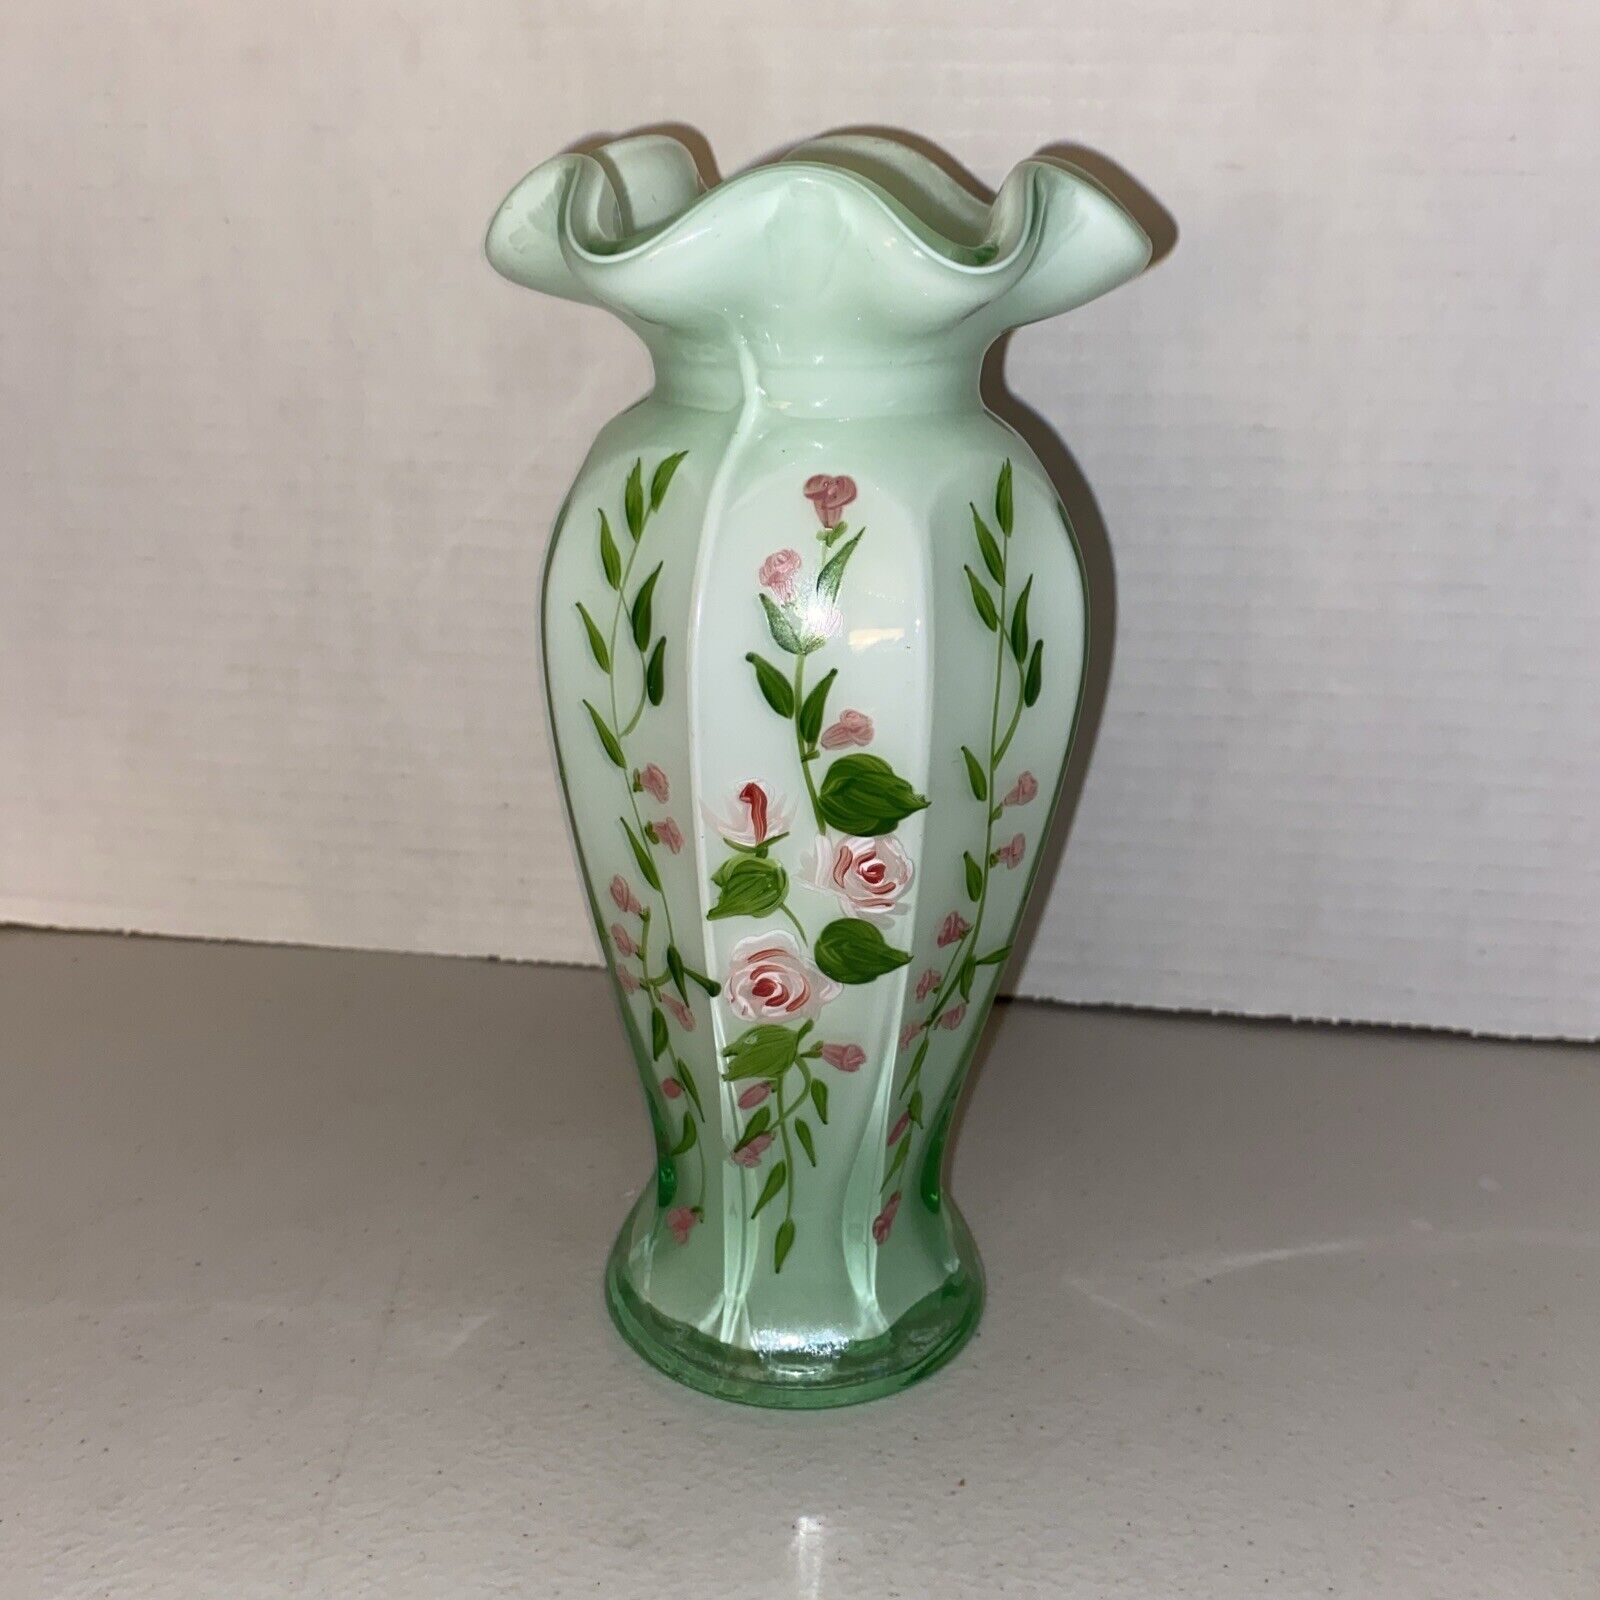 Fenton Opaline Green Cased Glass Ruffle Floral Hand Painted Roses Vase 7 1/2”